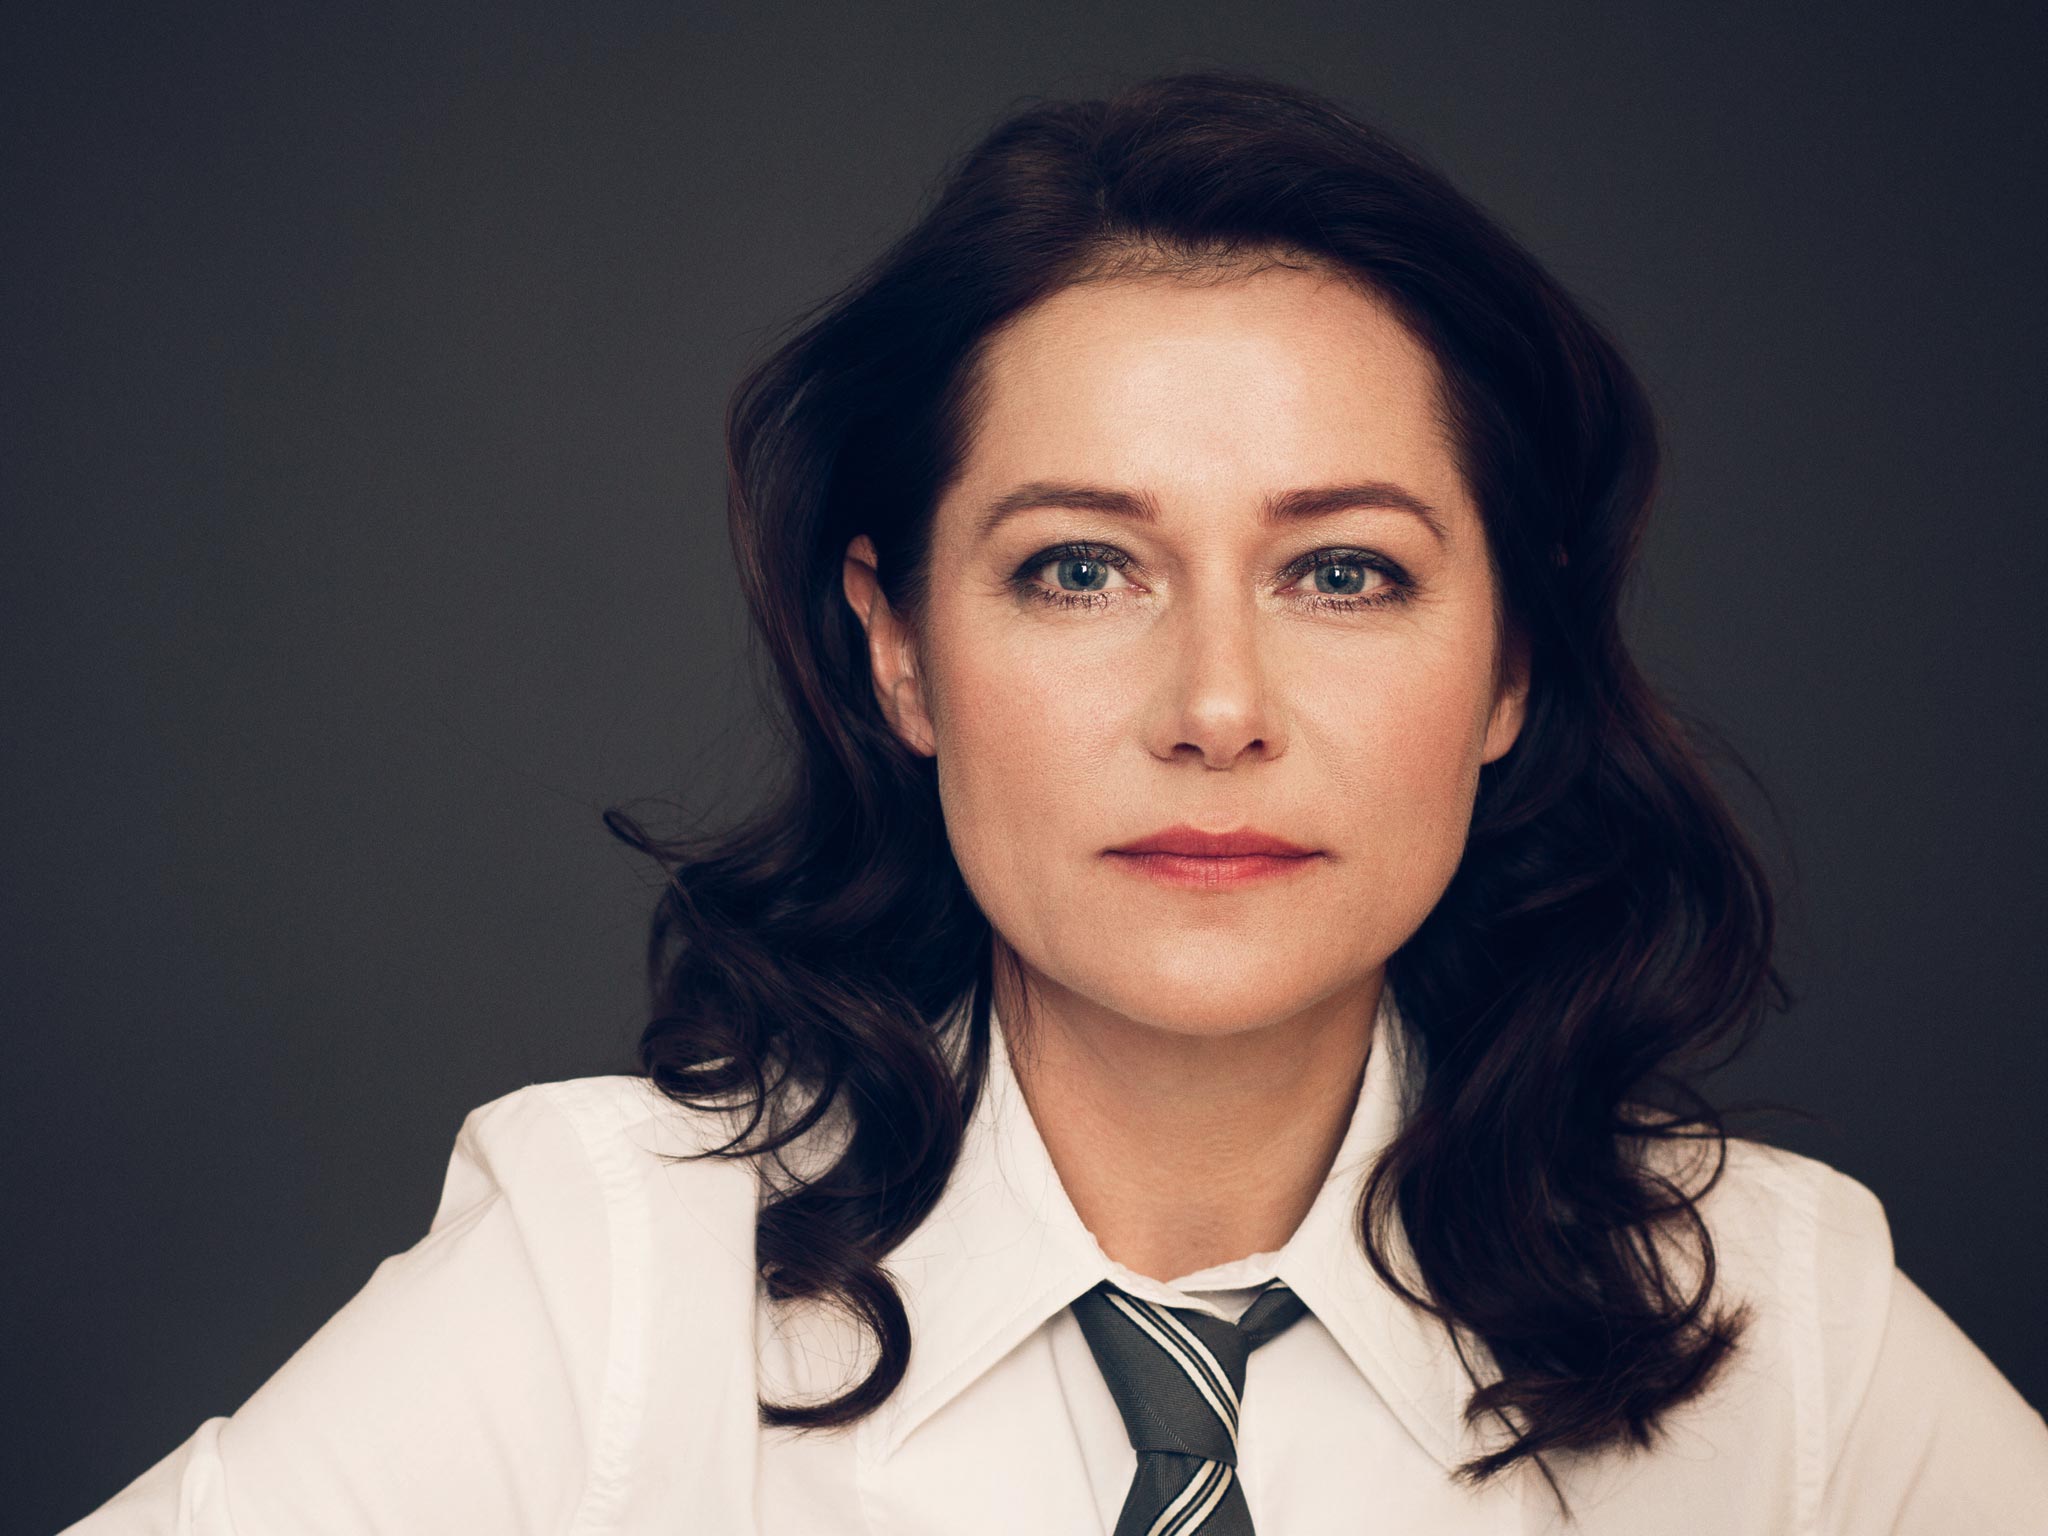 There's more to Sidse Babett Knudsen than Borgen